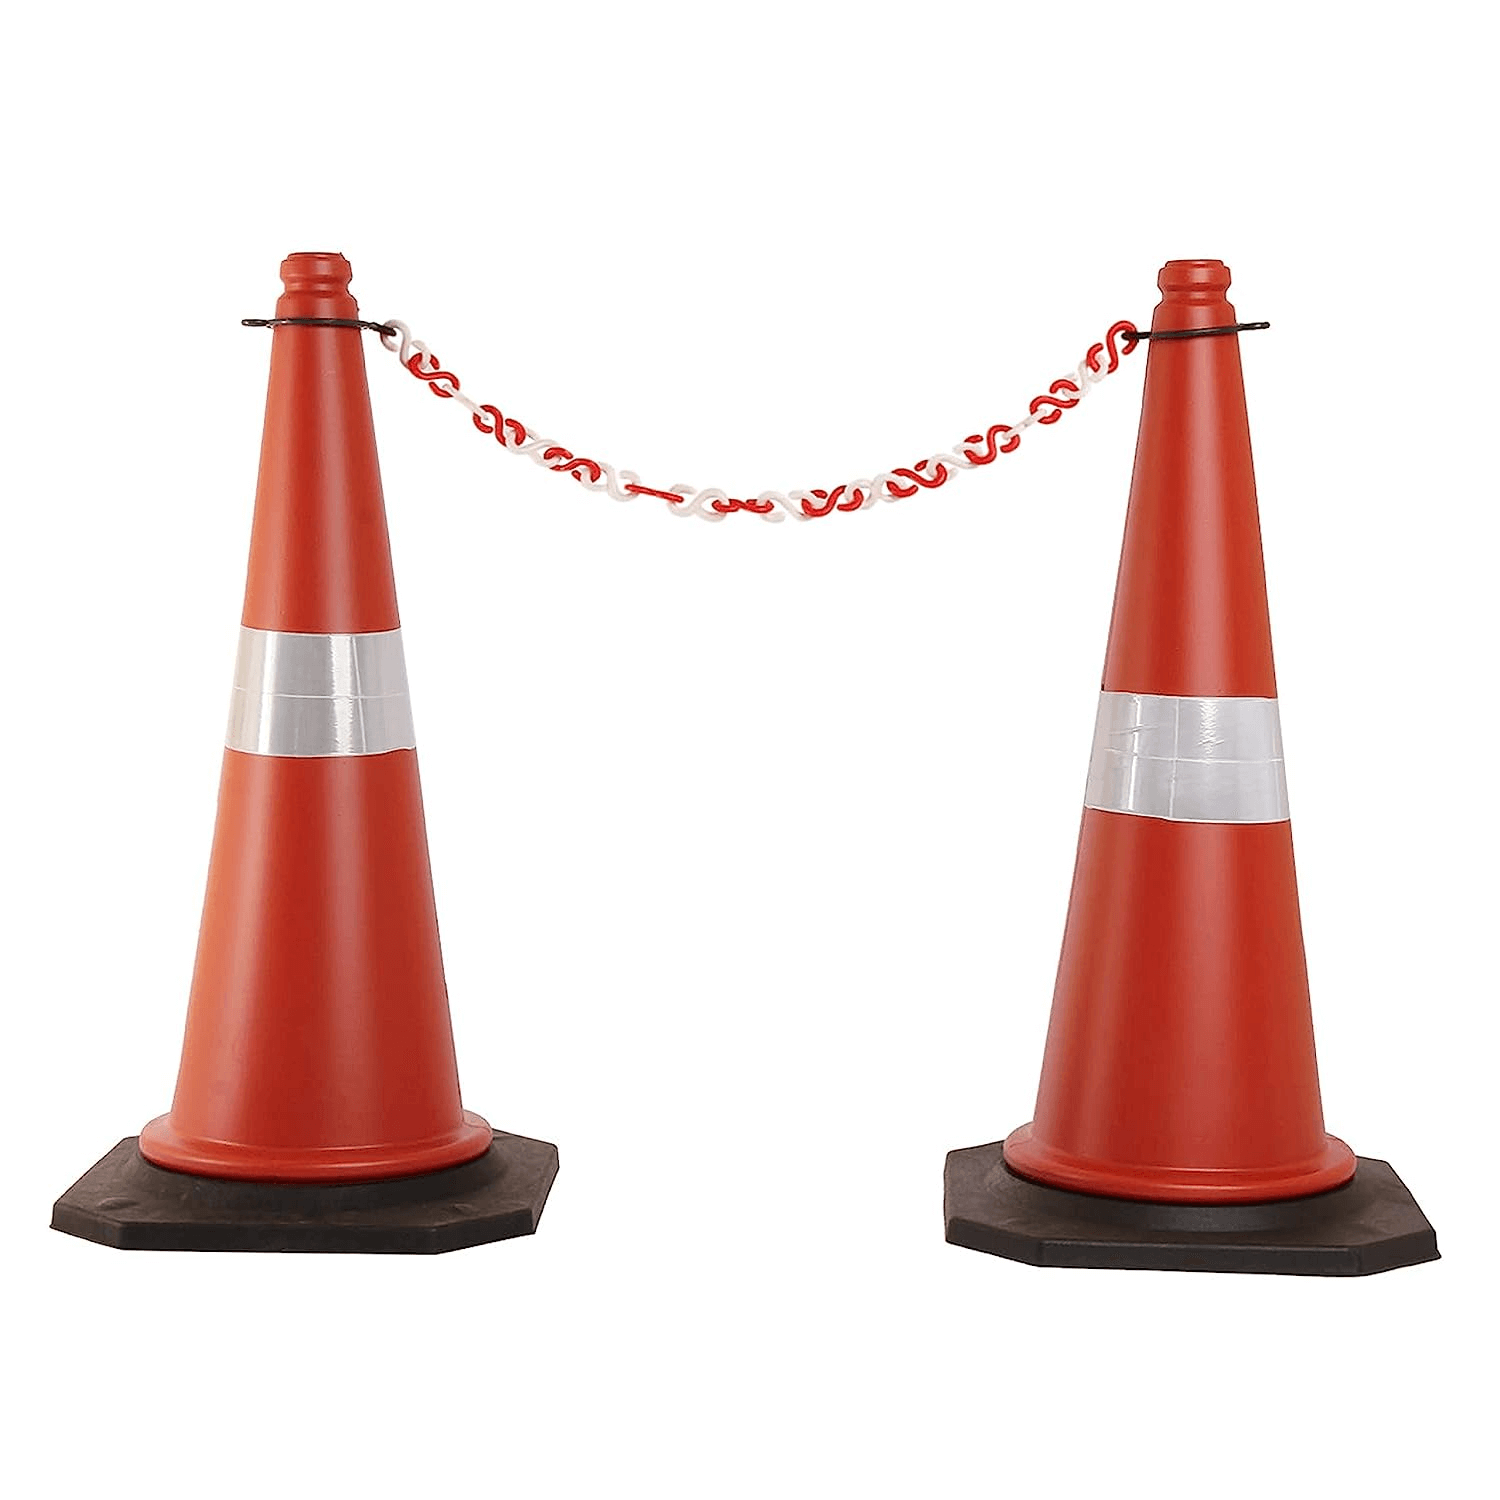 health-safe-safety-cone-with-chain-plastic-barricade-traffic-safety-cone-with-black-rubber-base-reflective-strips-collar-and-round-ring-impact-resistant-pack-of-4